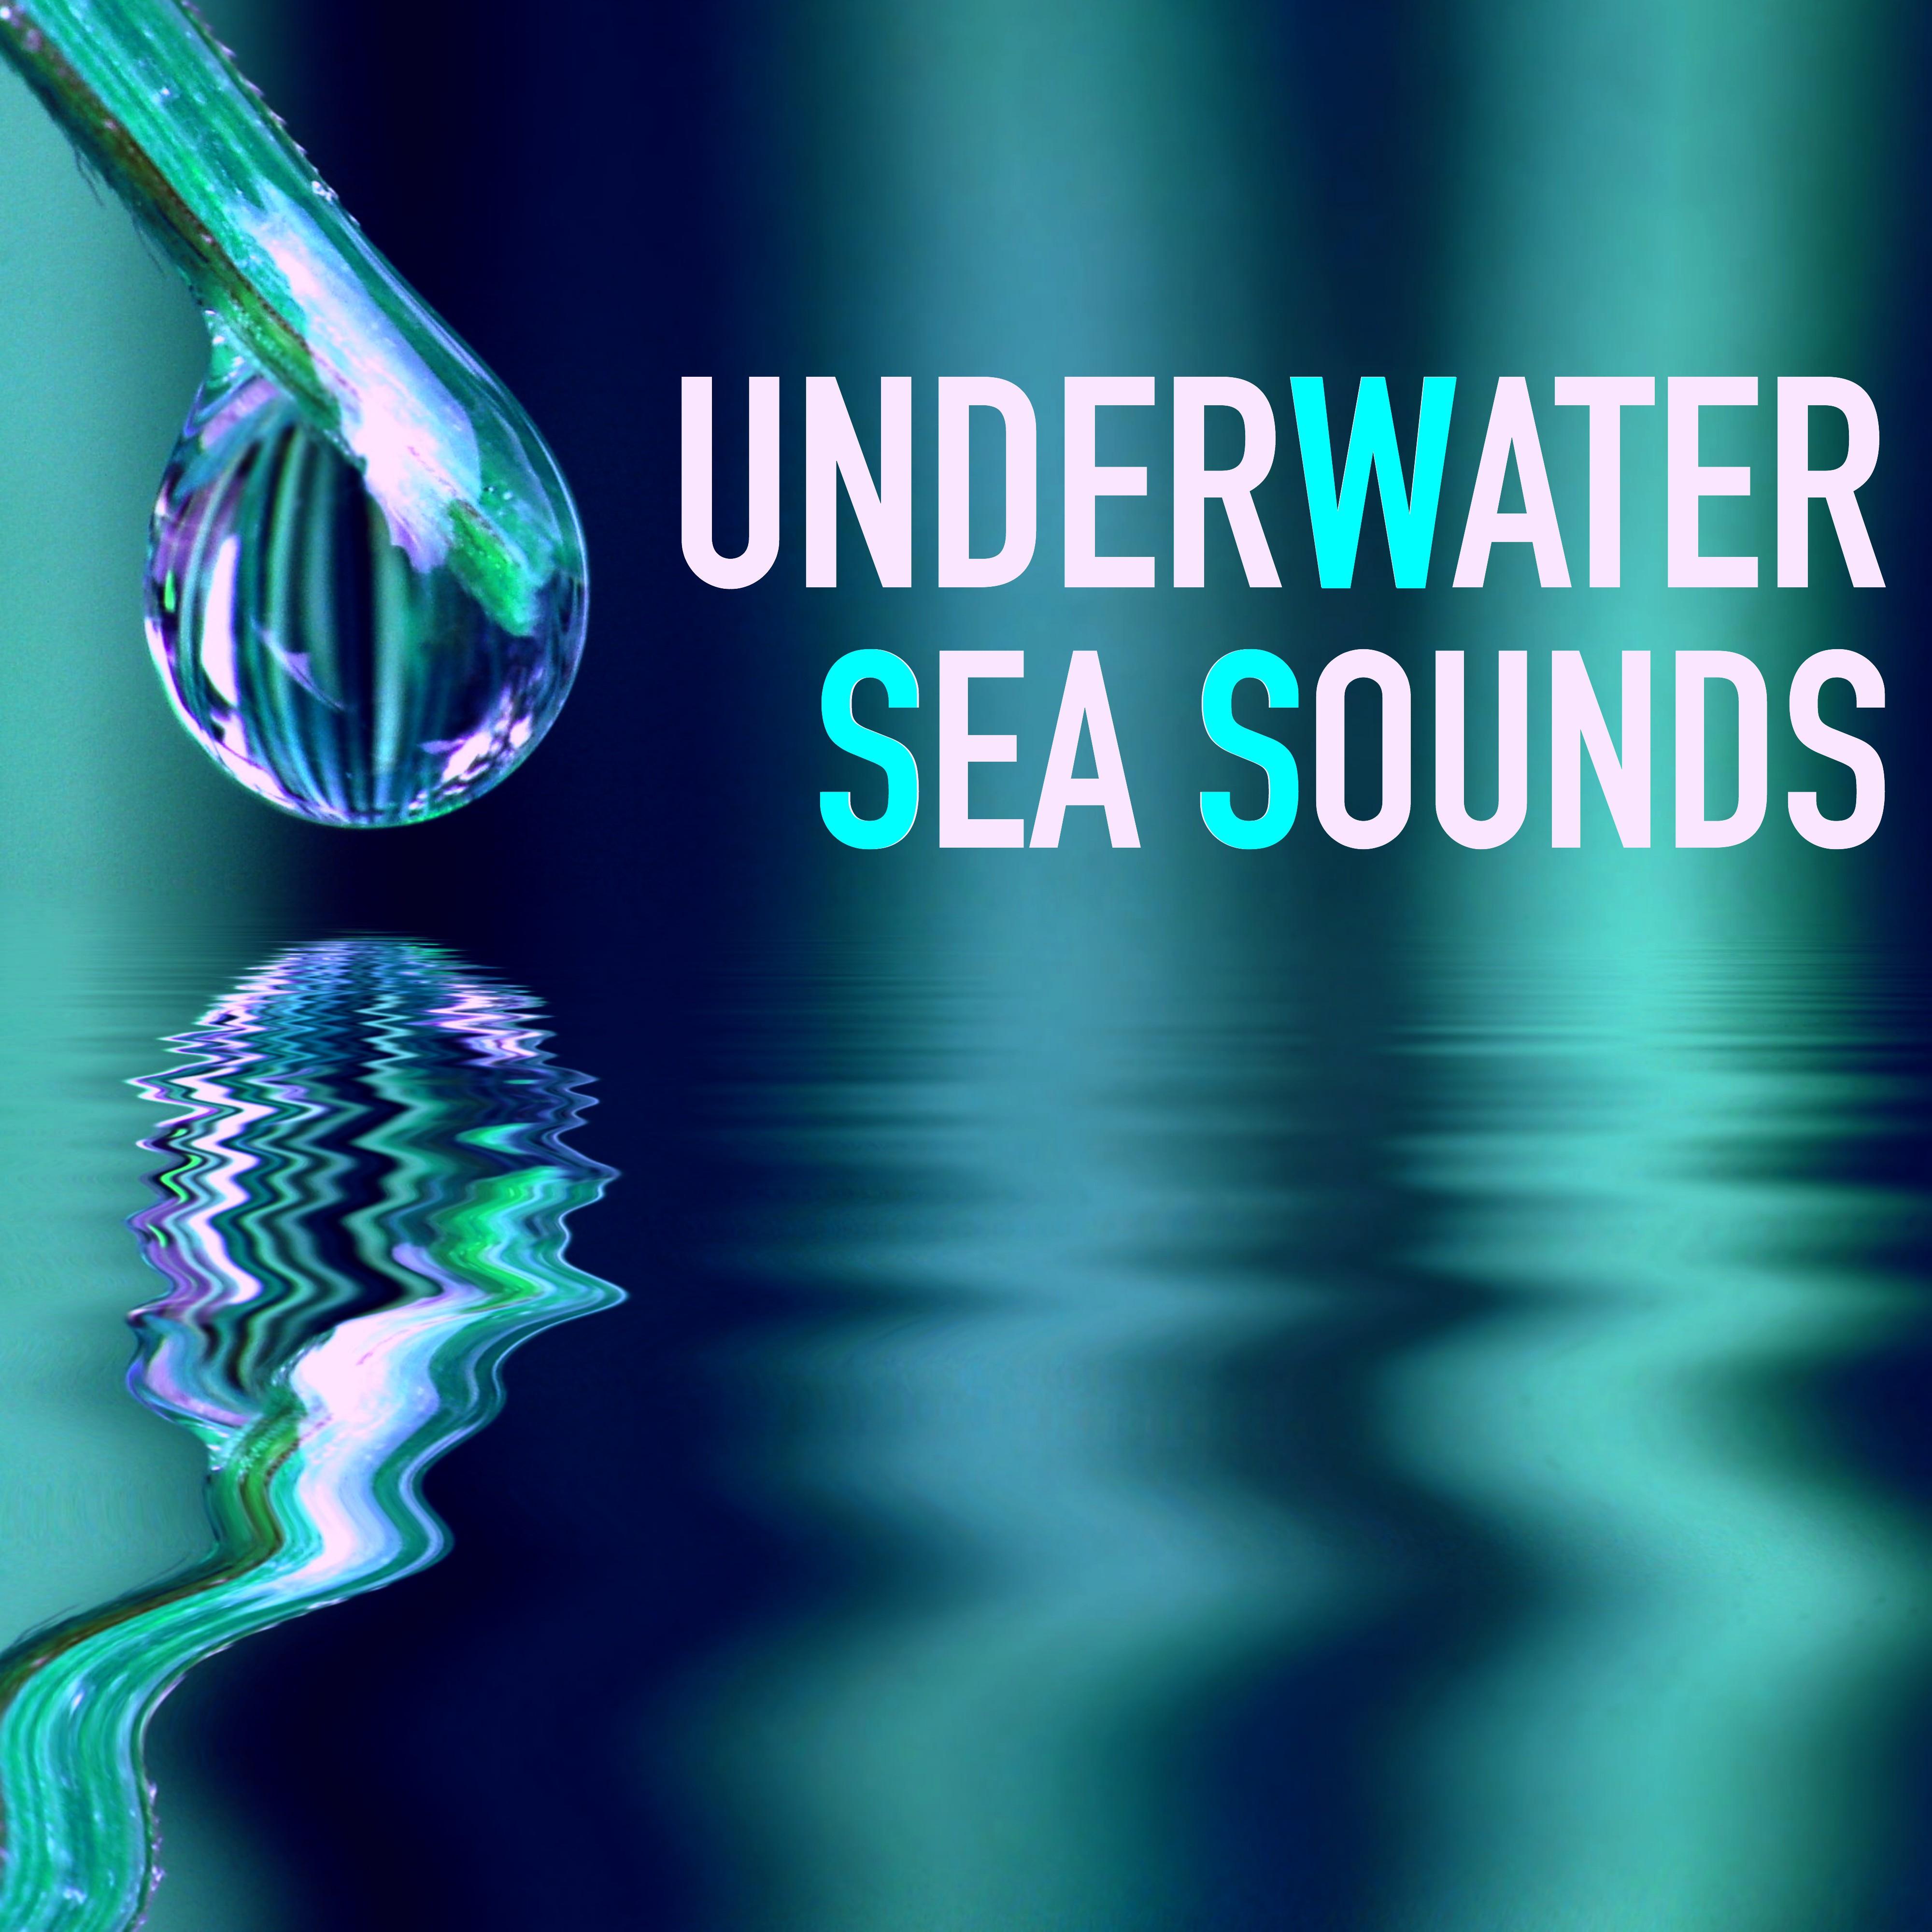 Underwater Sea Sounds - Binaural Underwater Recordings for Deep Relaxation, Deep Sleep Curing Insomnia and Stress - Relax Your Mind with Underwater Sounds of Nature